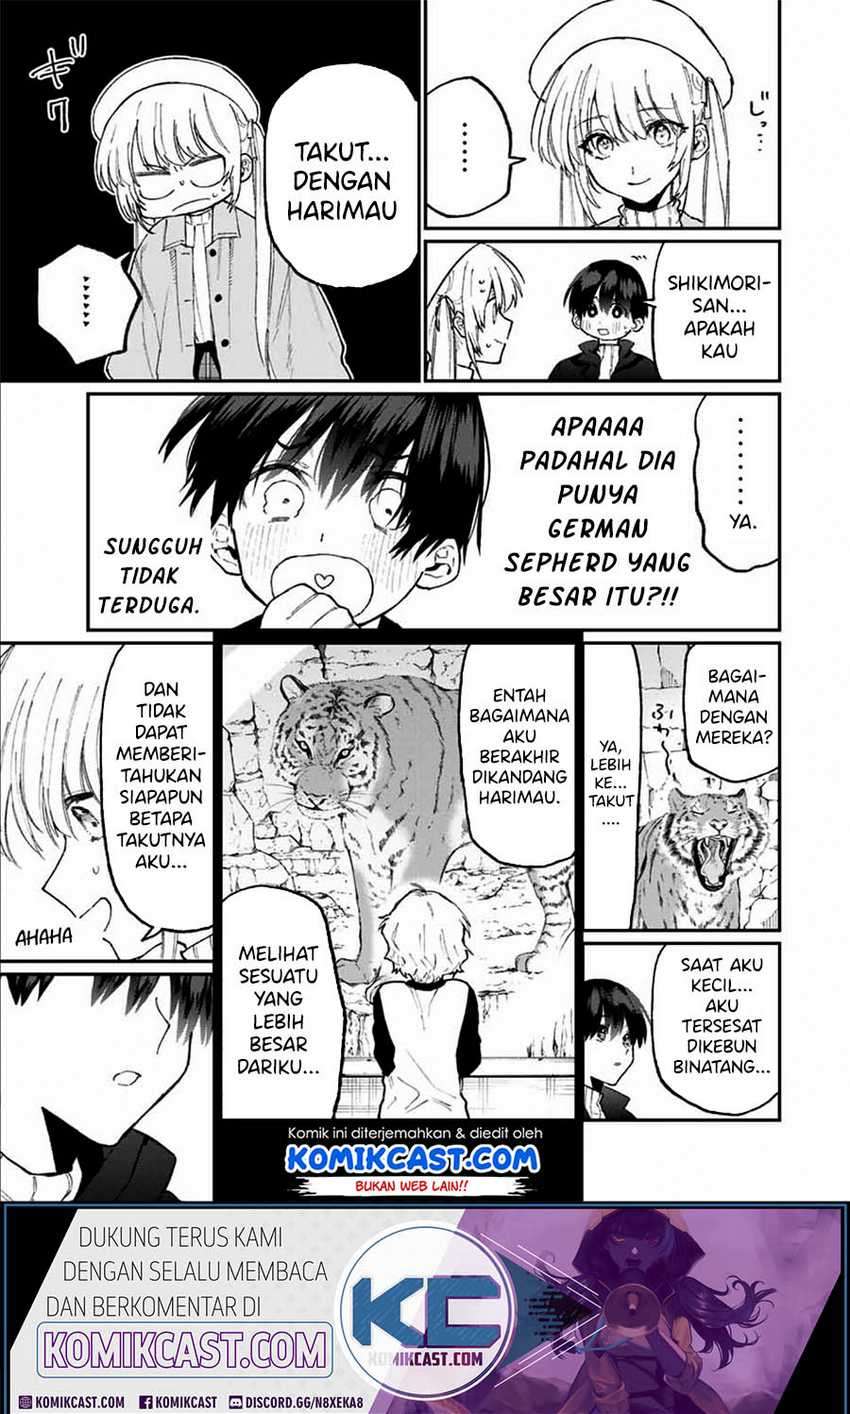 That Girl Is Not Just Cute Chapter 81 Bahasa Indonesia